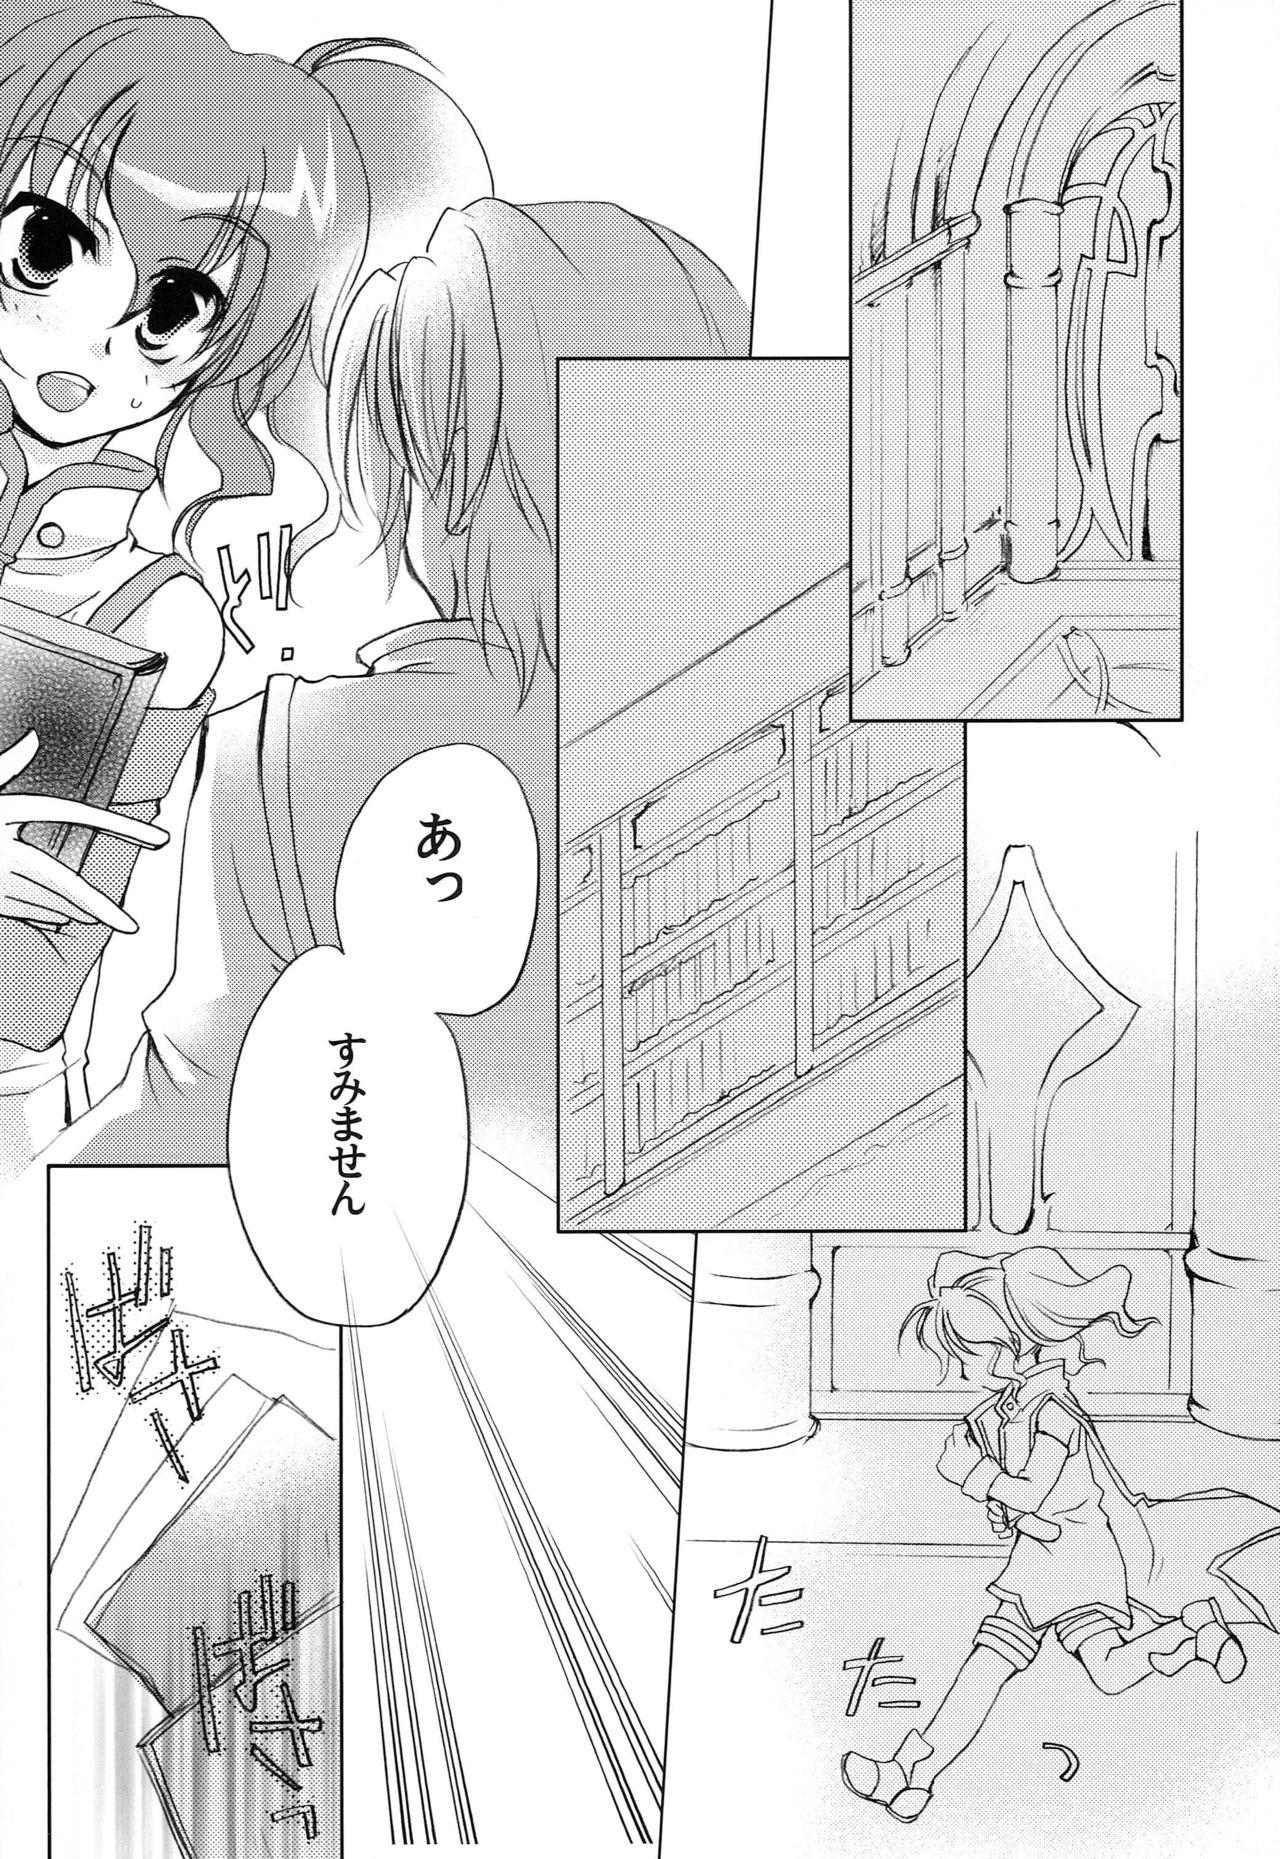 Prima Carnation, Lily, Lily, Rose - Tales of the abyss Jockstrap - Page 3